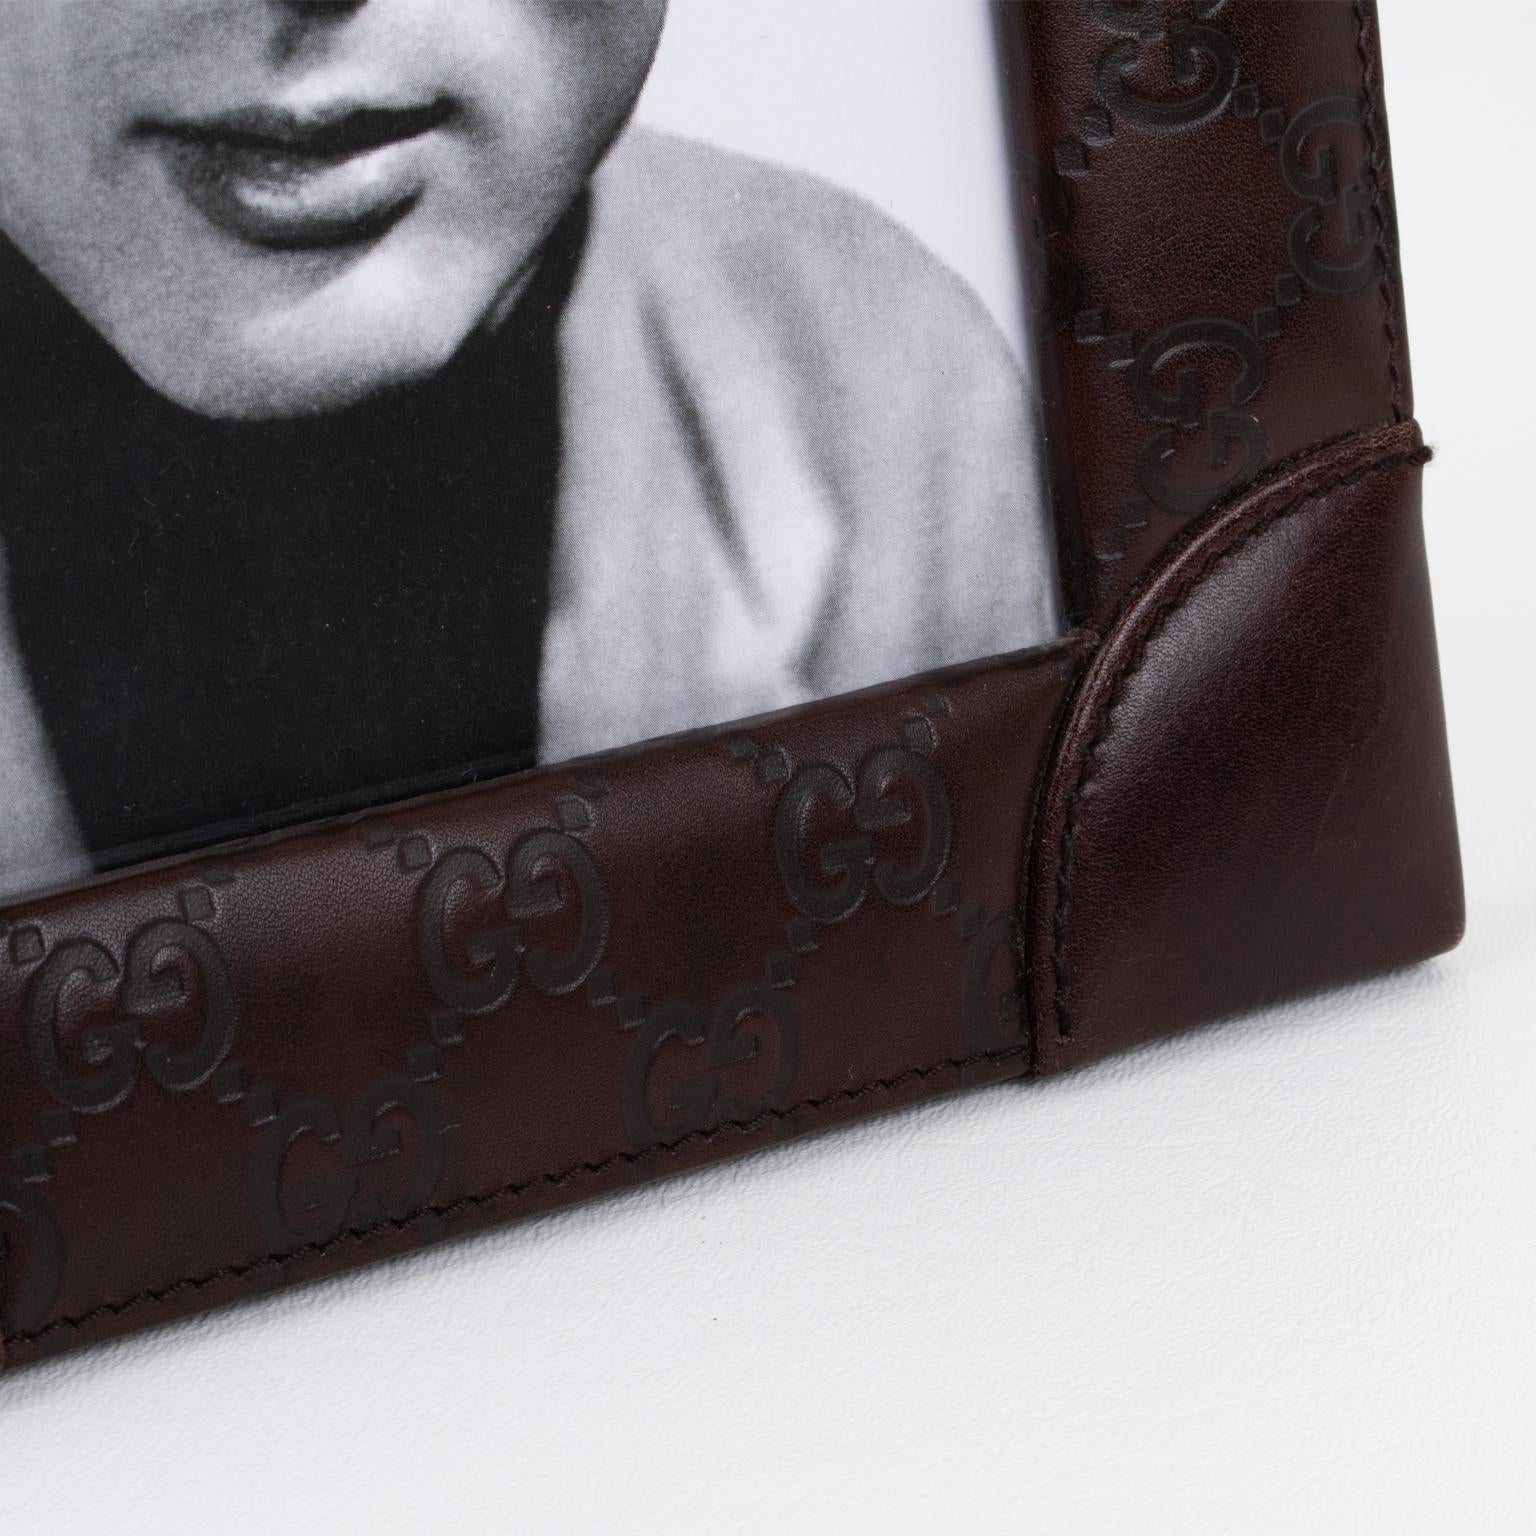 Late 20th Century Italian Gucci Hand-Stitched Brown Leather Picture Frame